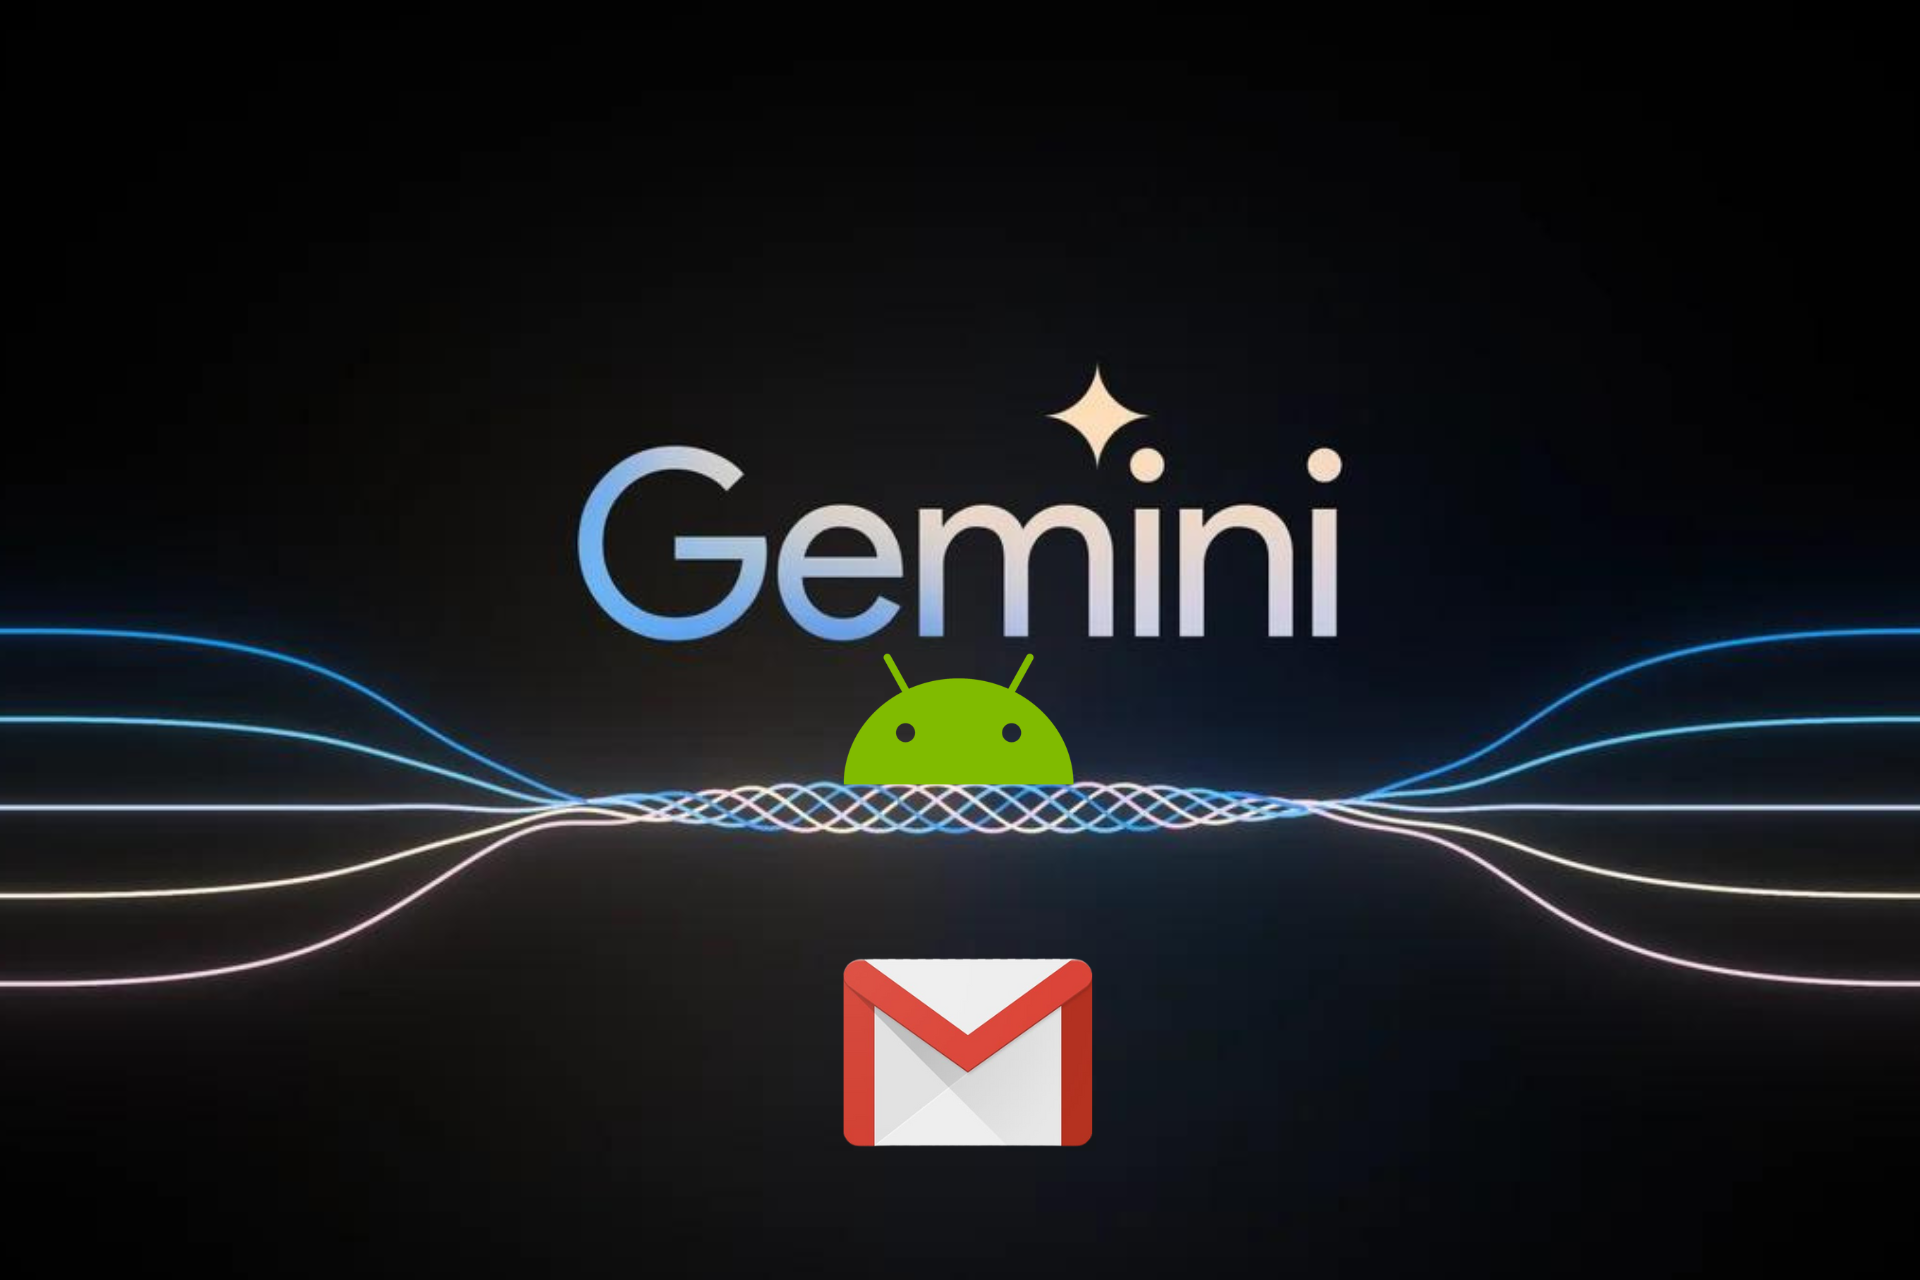 Gemini will bring the Reply Suggestion feature on the Gmail app for Android